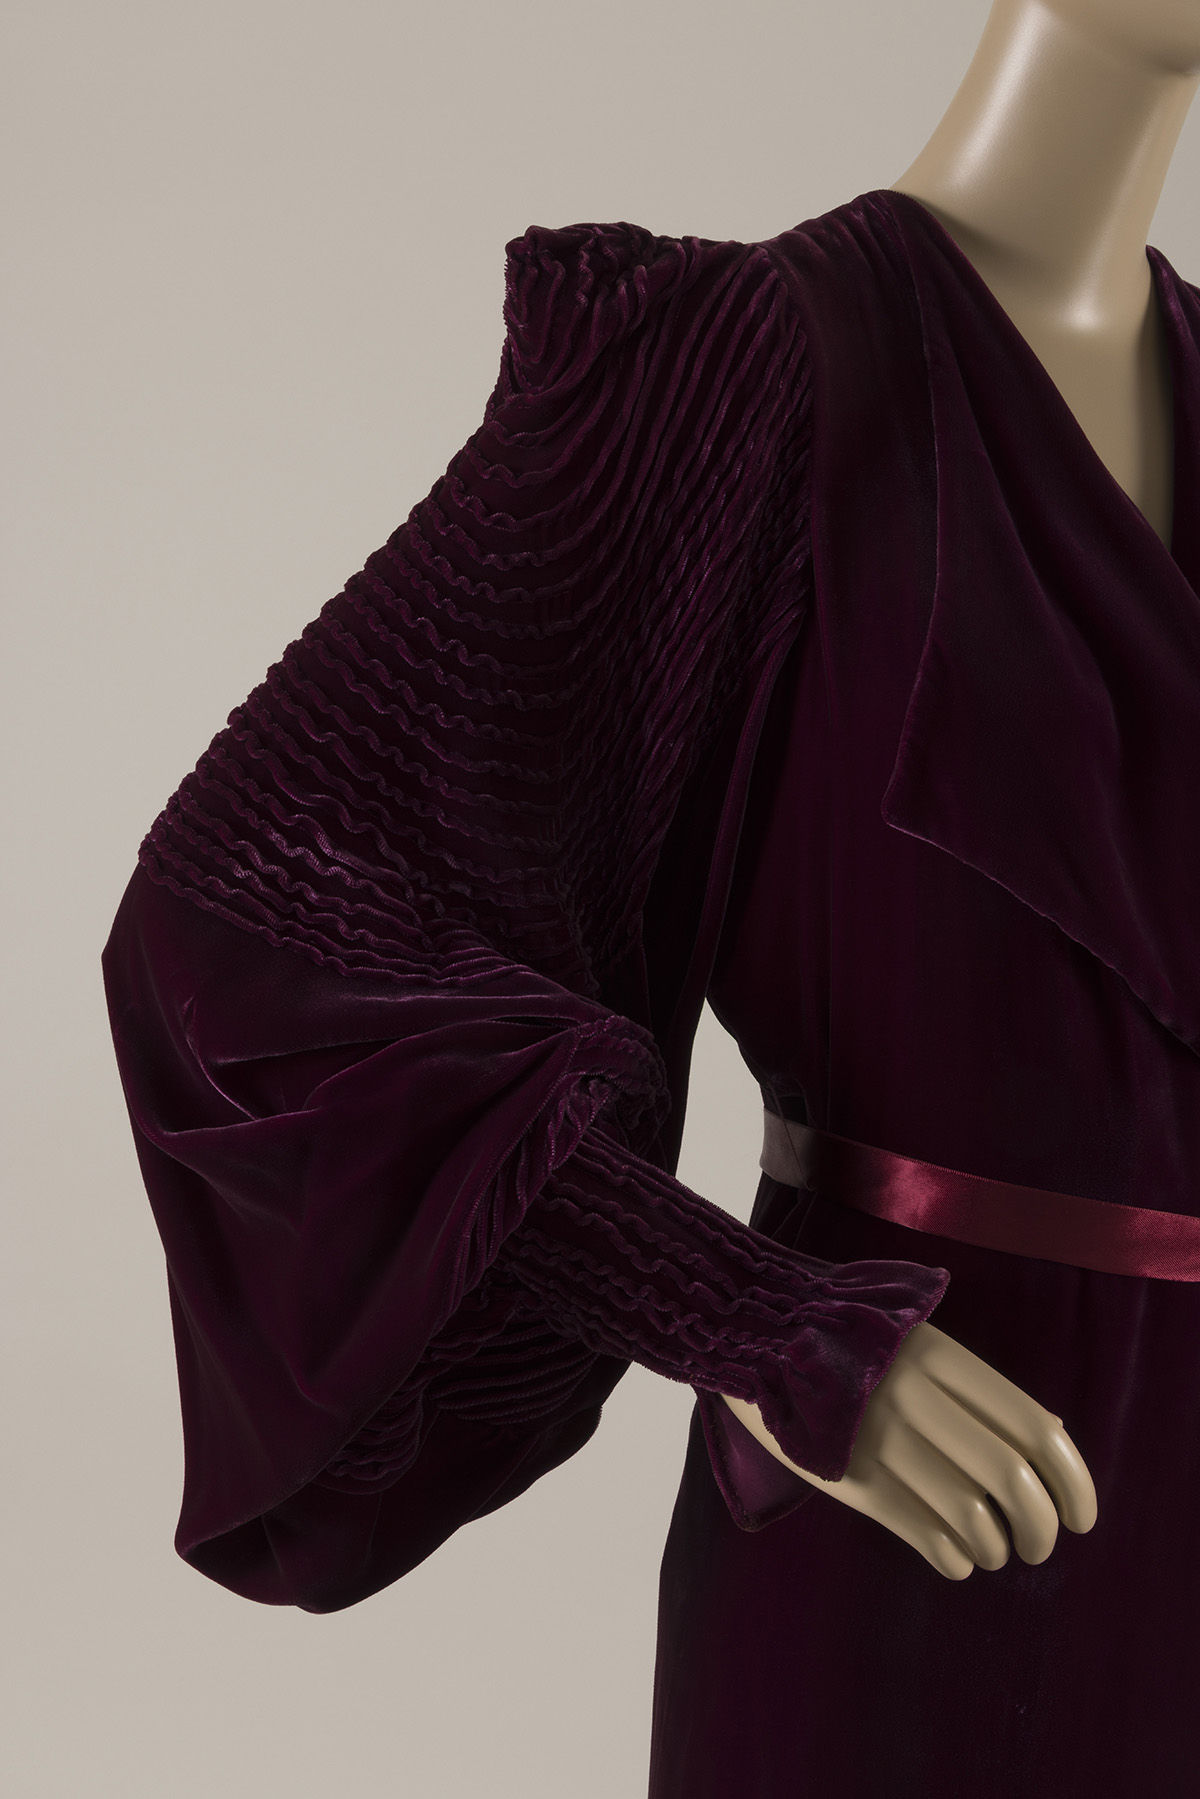 Partial side view of a woman’s dressing gown in velvet, tied at the waist with a matching silk ribbon. The full sleeve has a sharply defined shoulder, a tapered cuff, and elaborate pin-tucks in concentric circles.